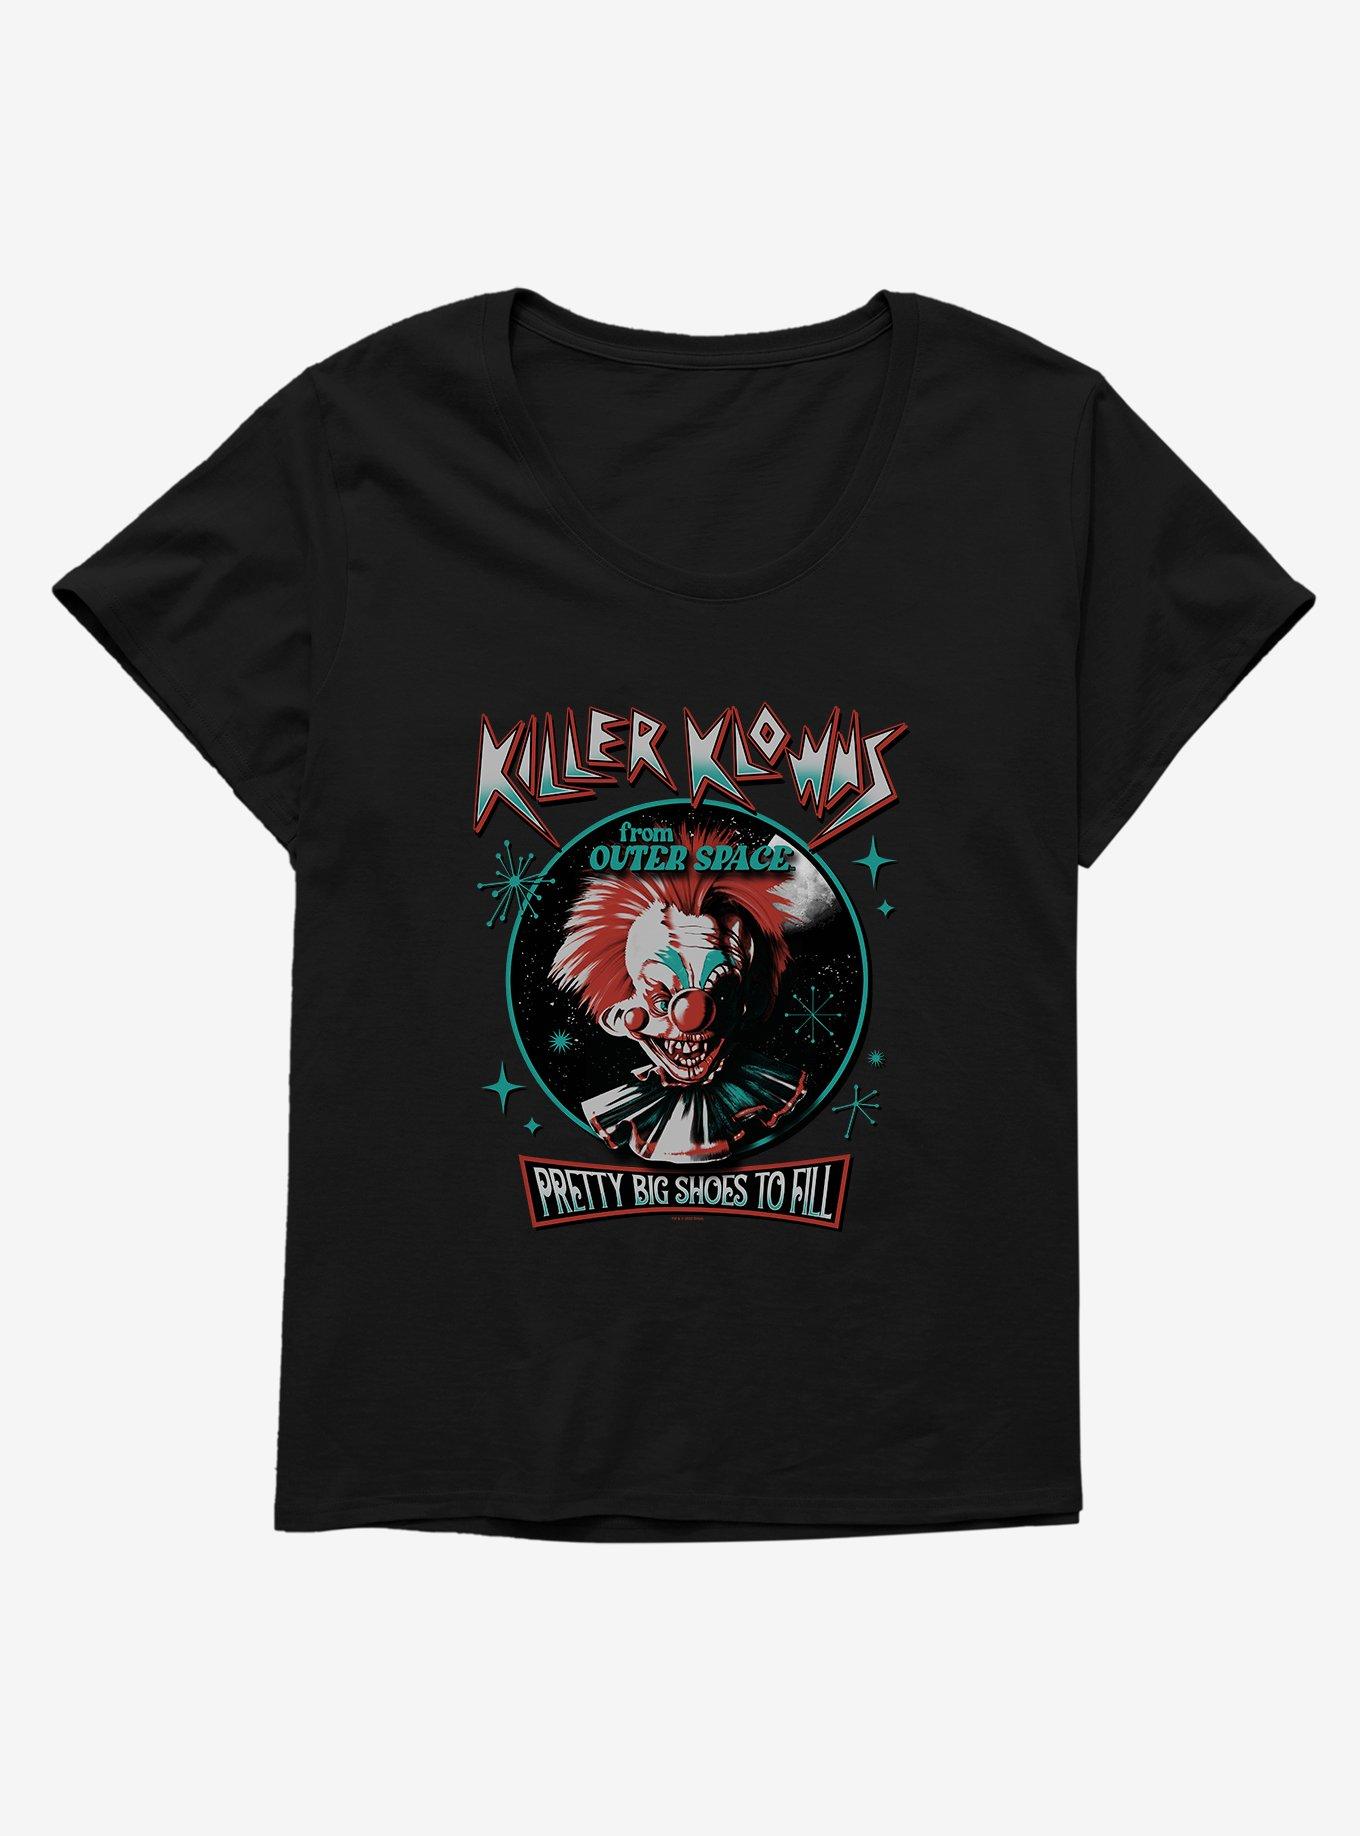 Killer Klowns From Outer Space Pretty Big Shoes To Fill Girls T-Shirt Plus Size, BLACK, hi-res